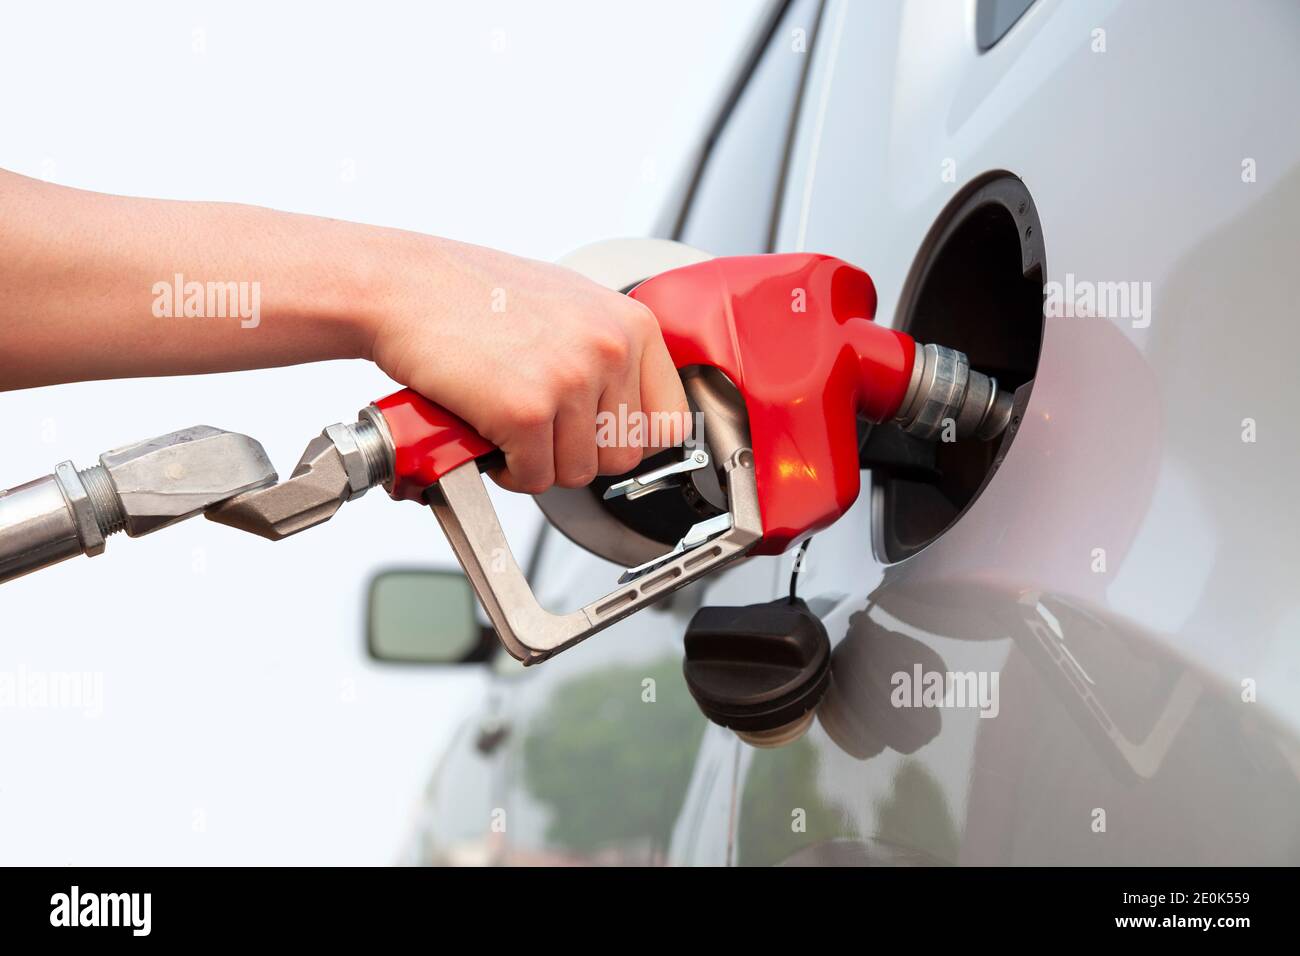 Isolated arm and hand of a young man pumping gas into his car Stock Photo